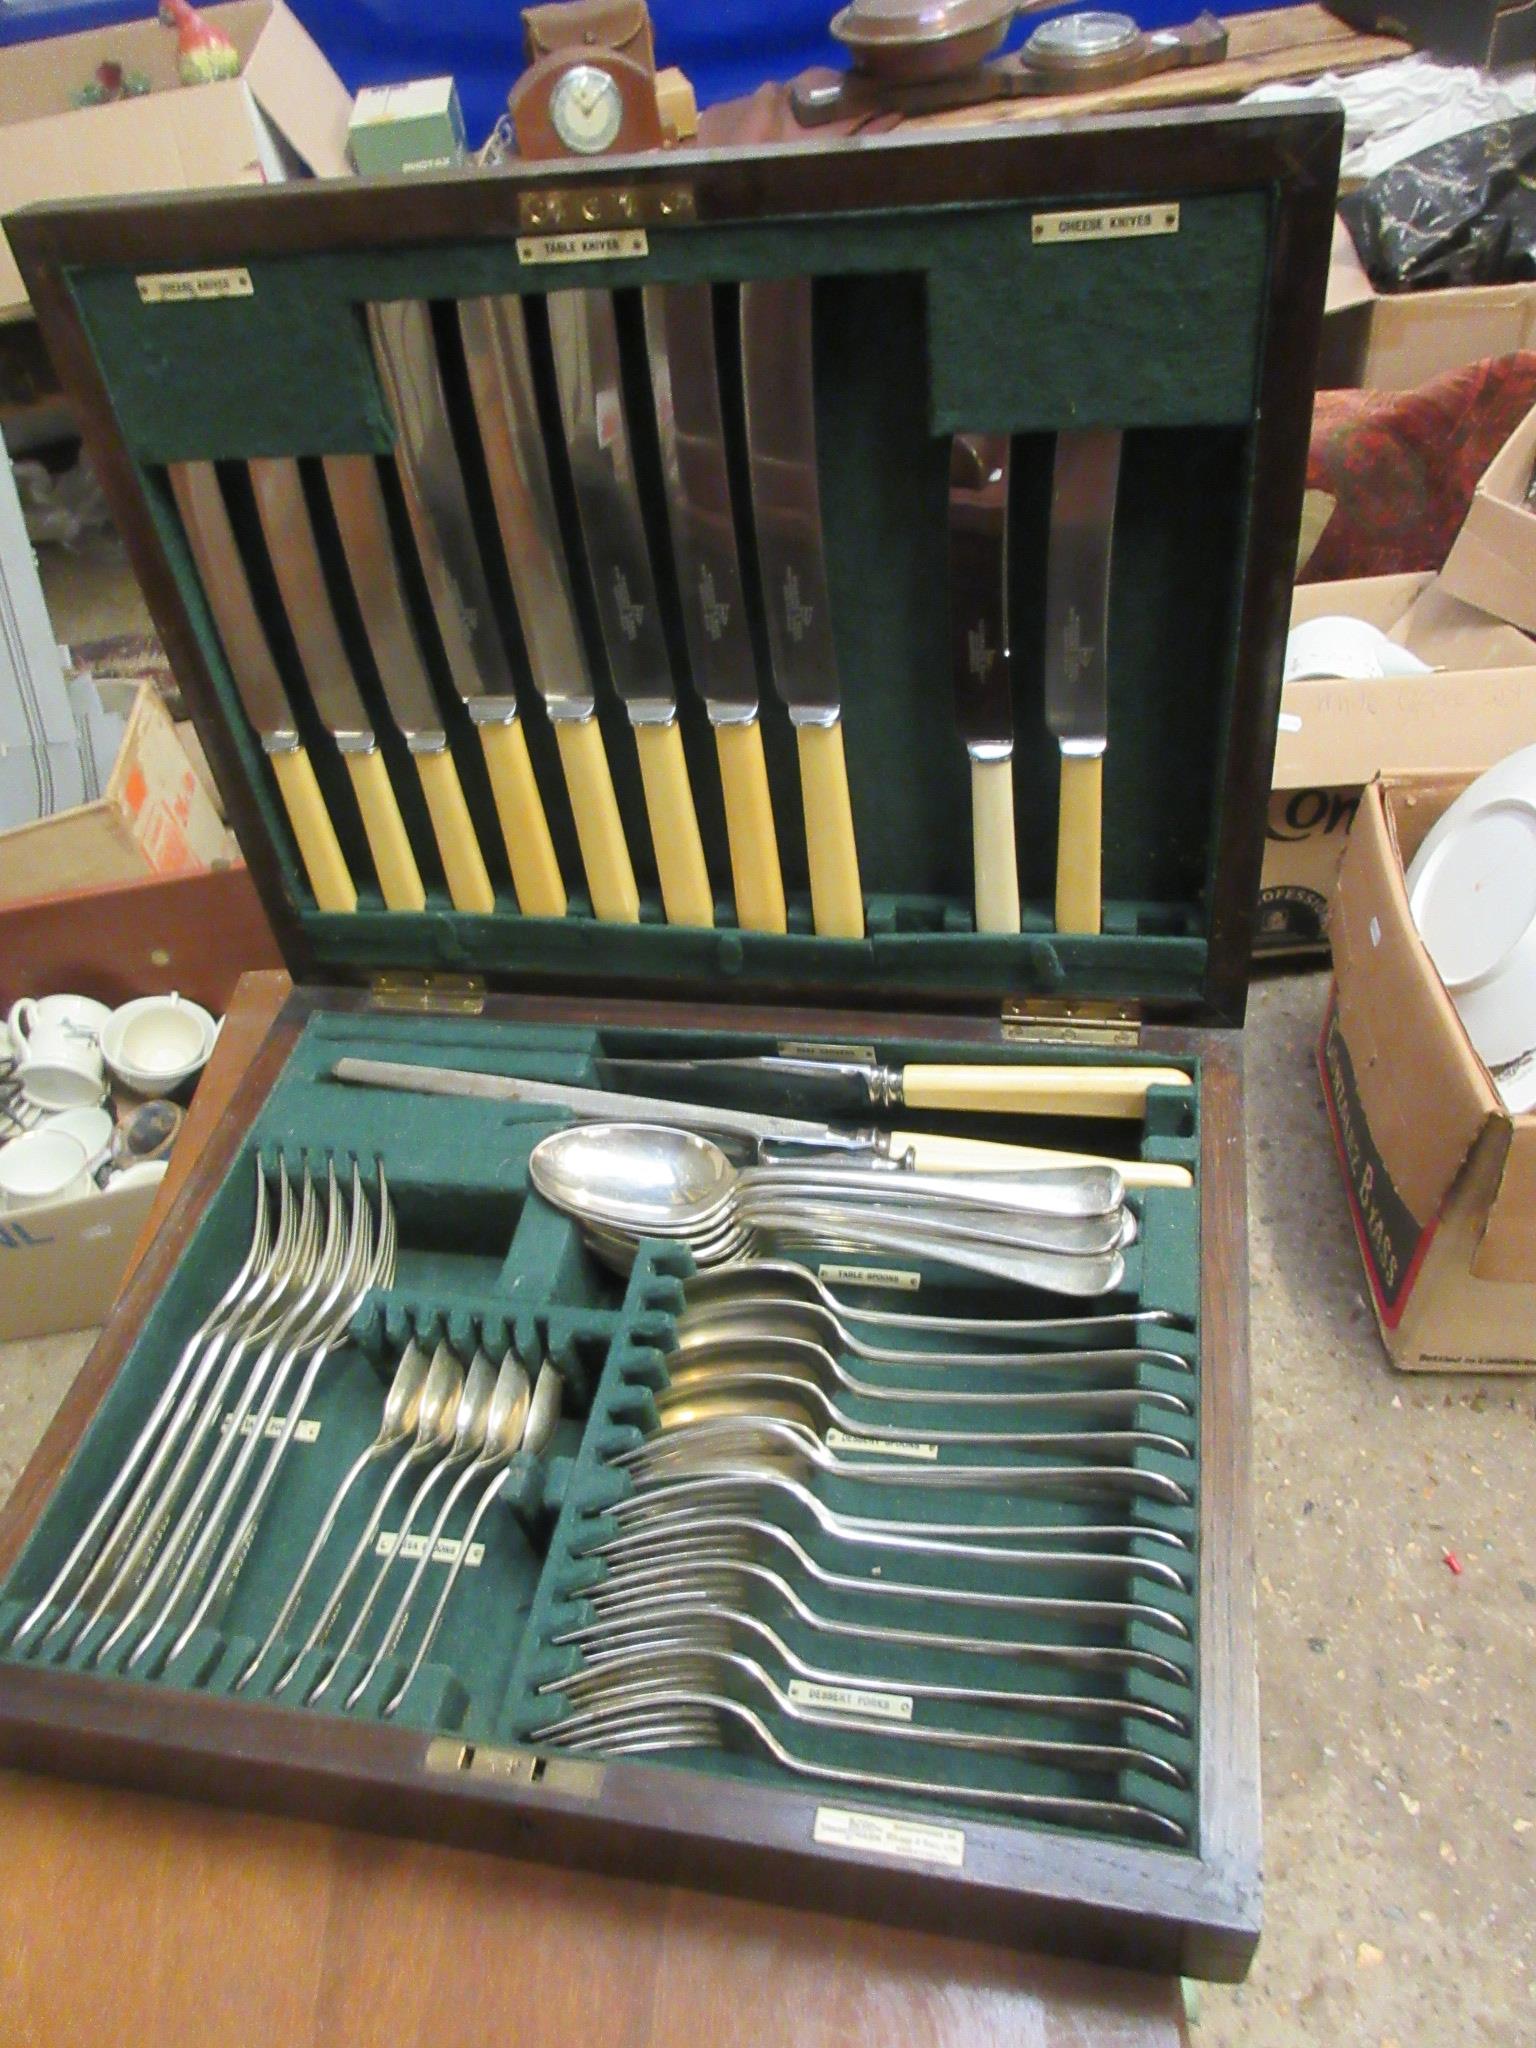 THREE VARIOUS CUTLERY CANTEENS CONTAINING VARIETY OF BONE HANDLED AND OTHER CUTLERY - Image 7 of 7